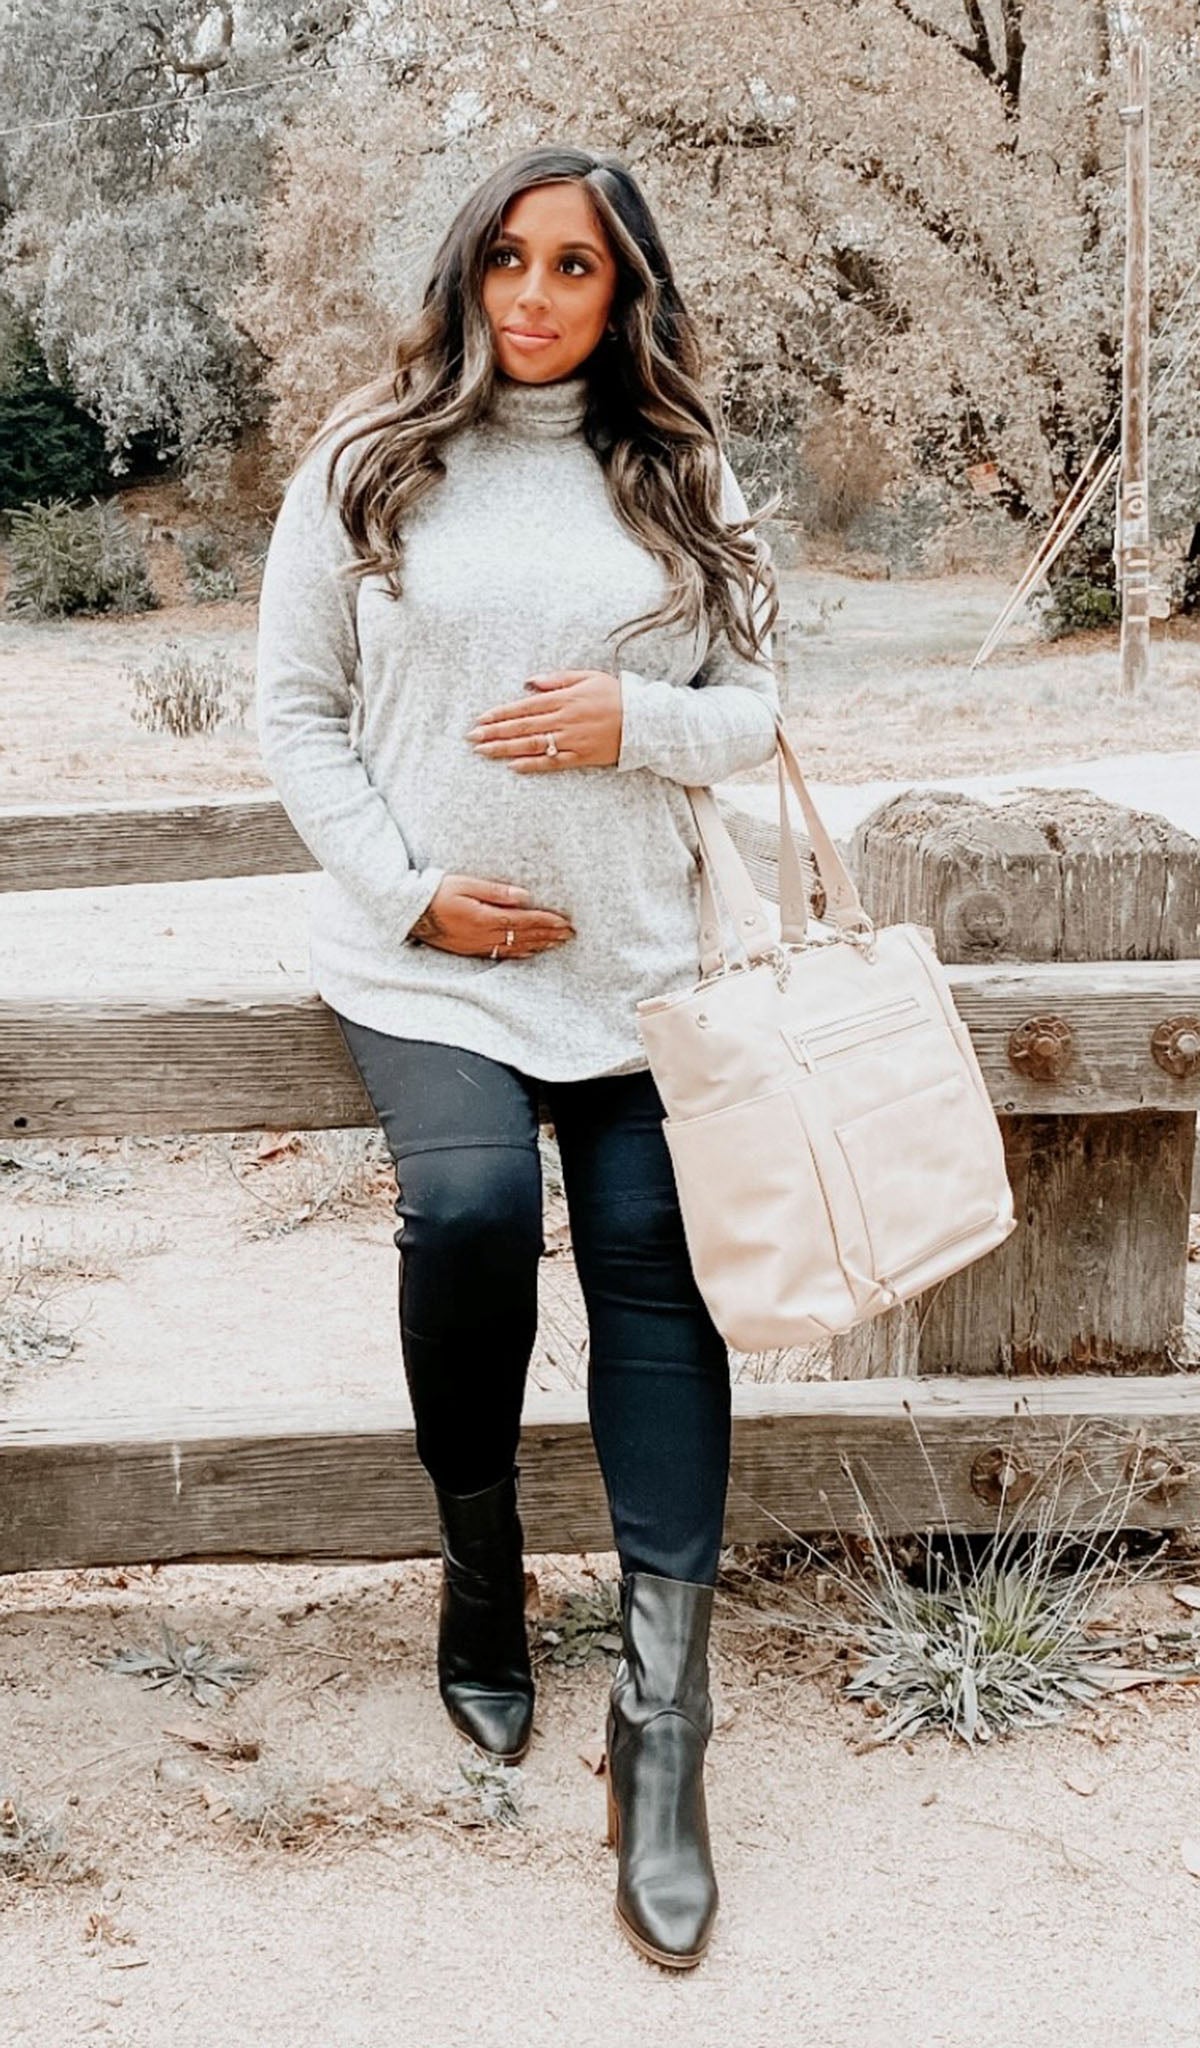 Heather Grey Teresa sweater worn by pregnant woman leaning on fence.